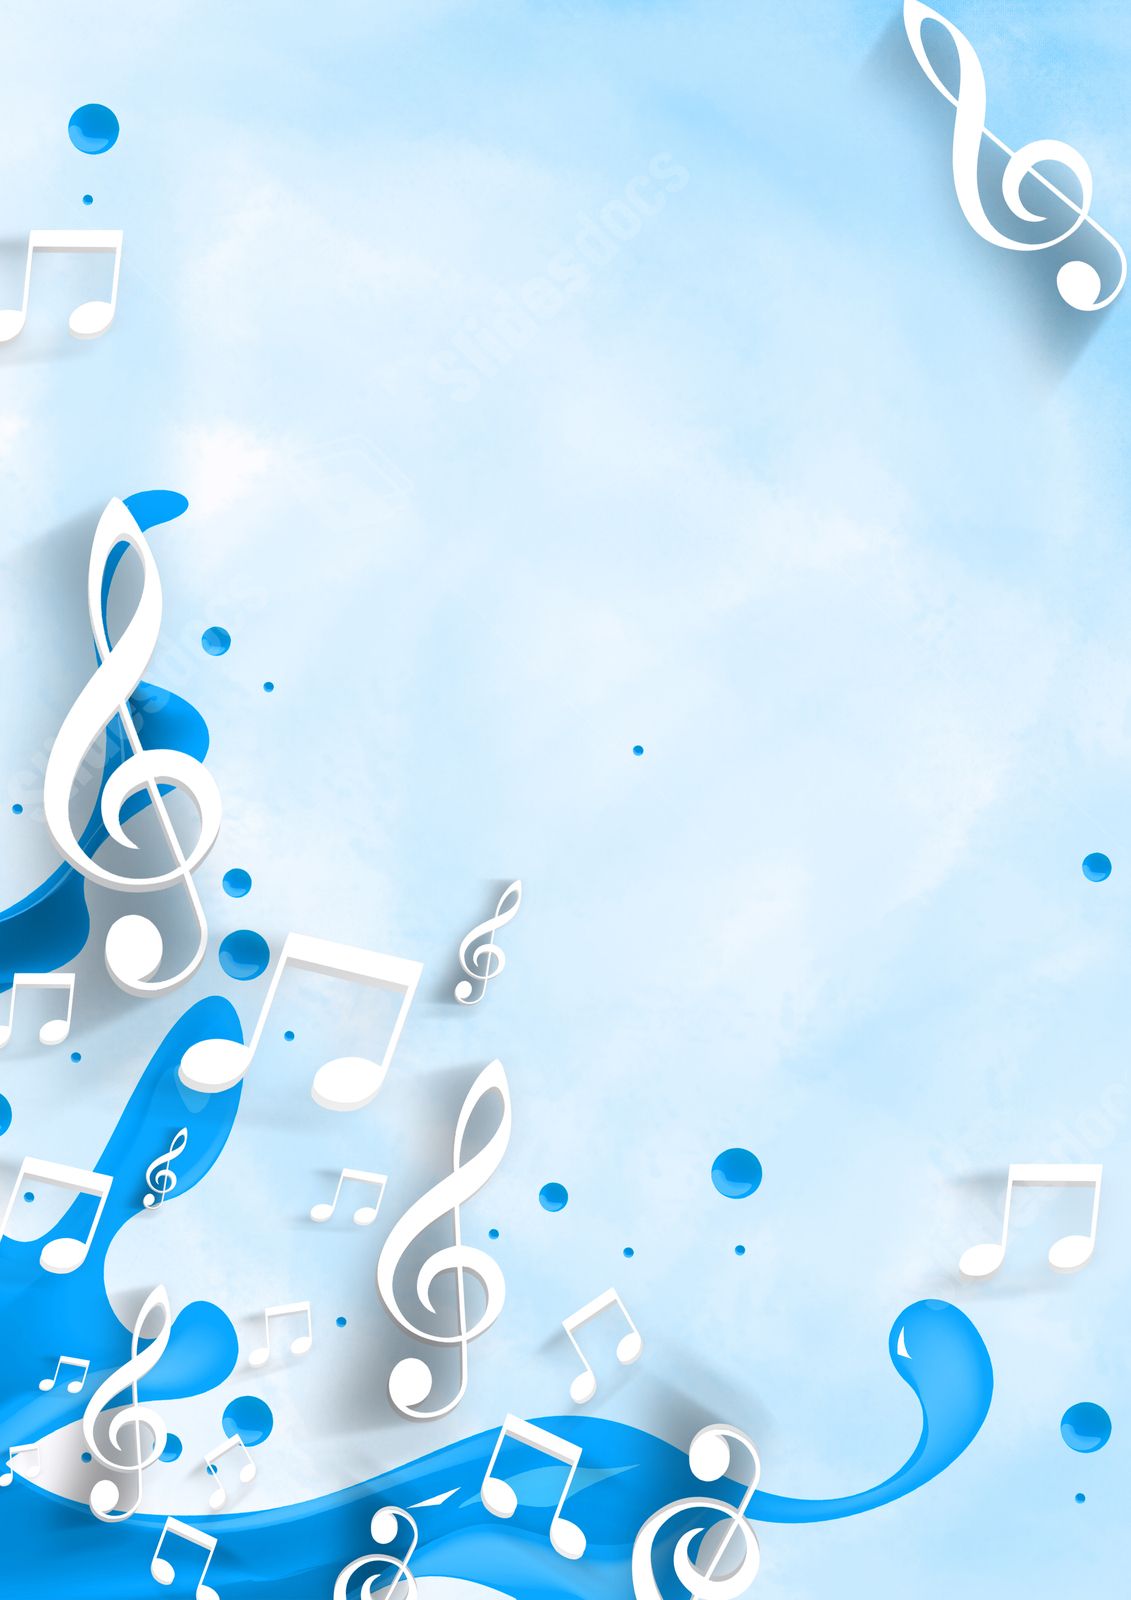 music page backgrounds